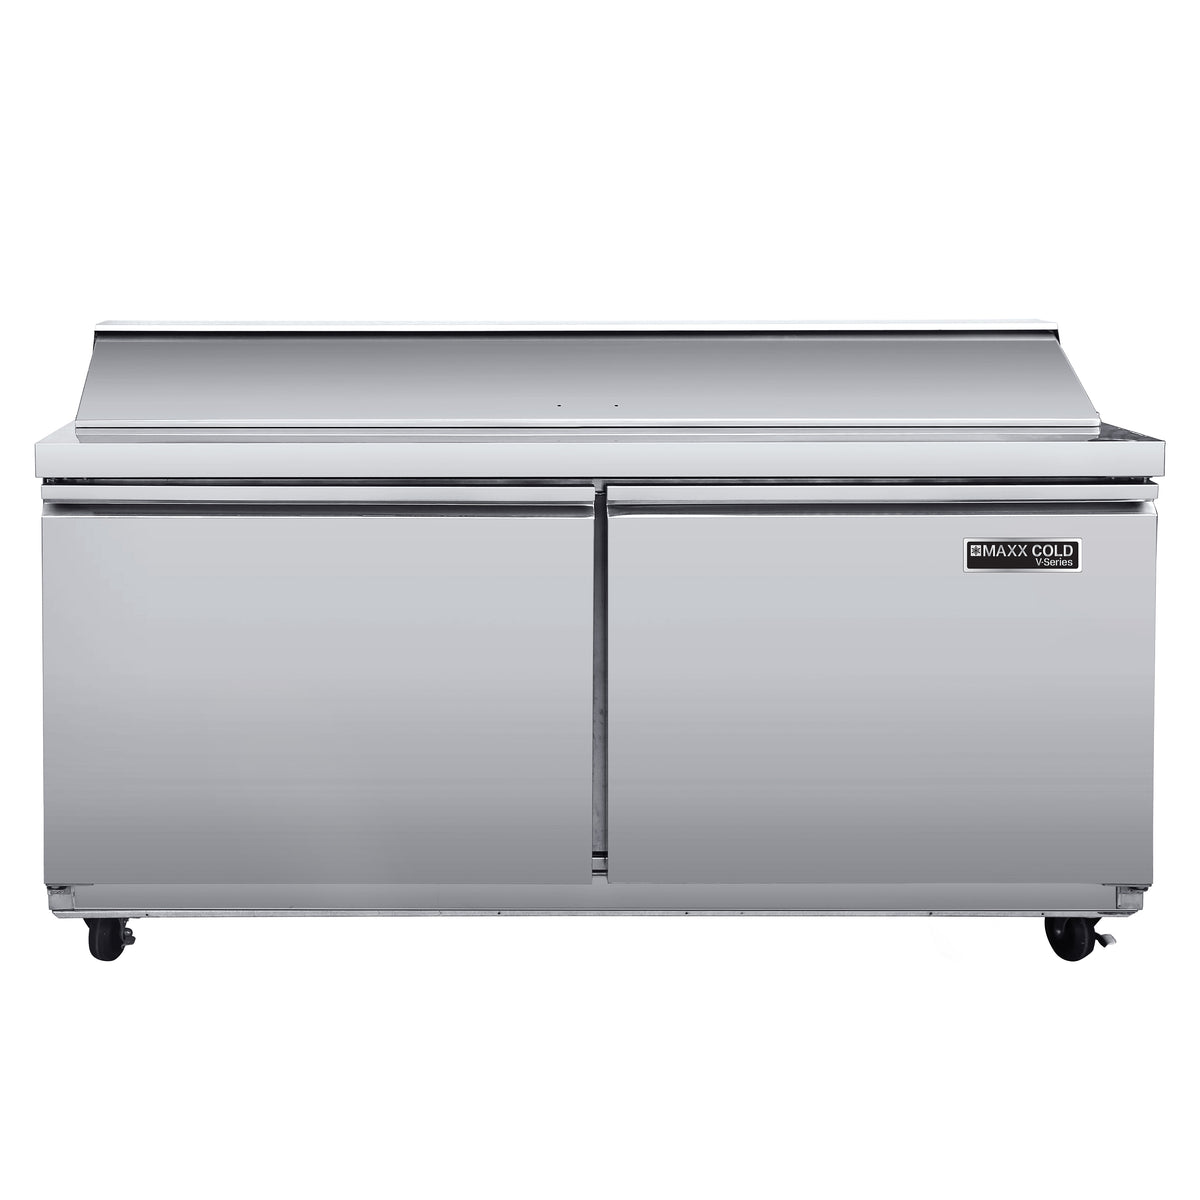 Maxx Cold MVR60SHC V-Series 2 Door Refrigerated Sandwich and Salad Prep Station, 60"W, 17.3 cu ft, in Stainless Steel